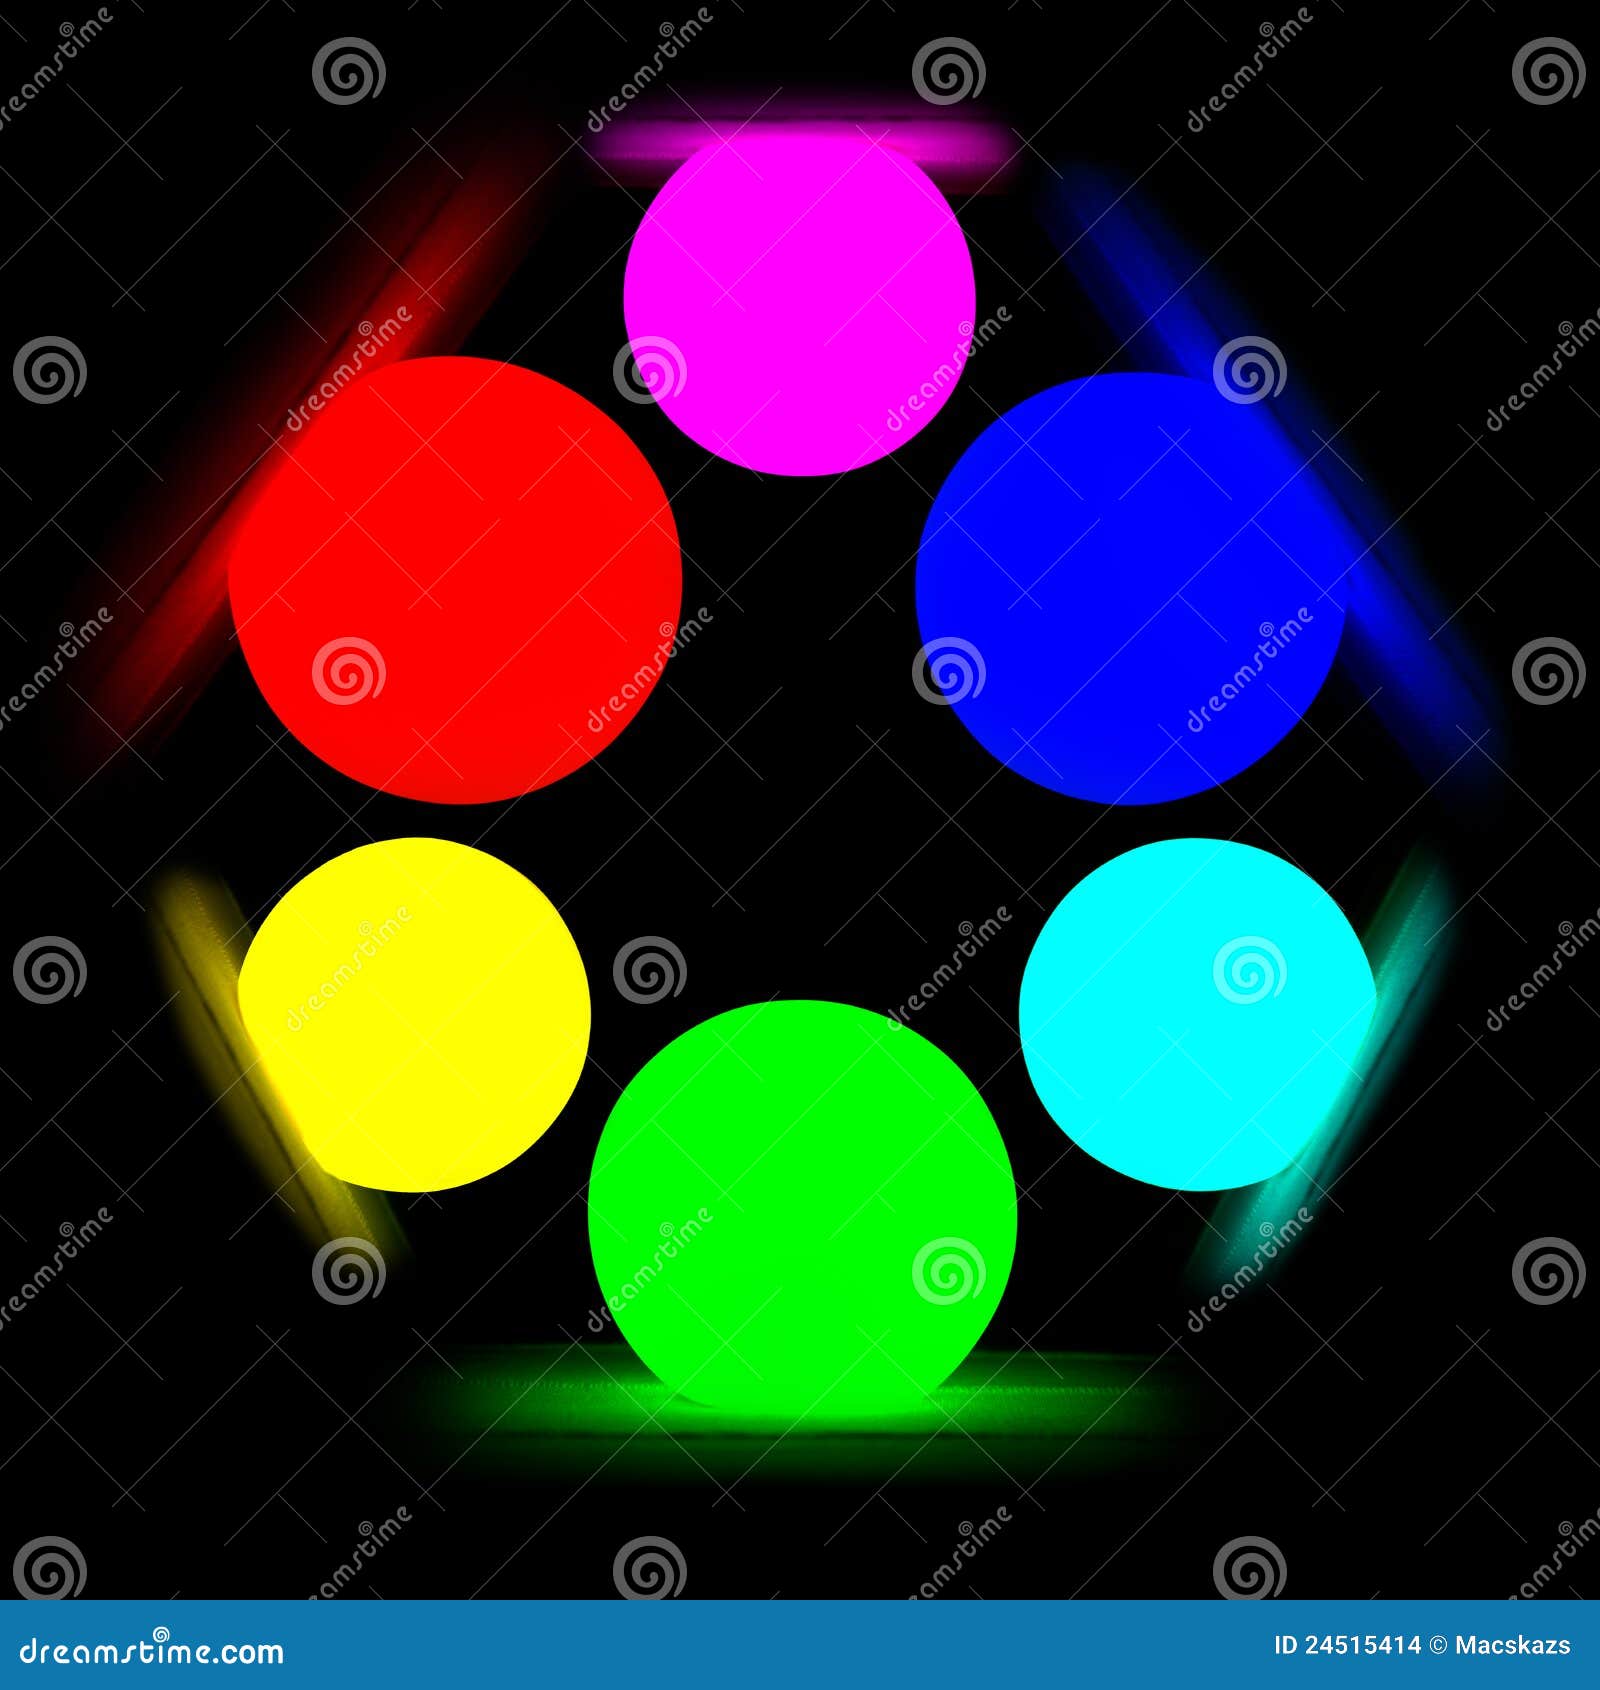 Rgb Color Chart Stock Illustrations – 2,827 Rgb Color Chart Stock  Illustrations, Vectors & Clipart - Dreamstime